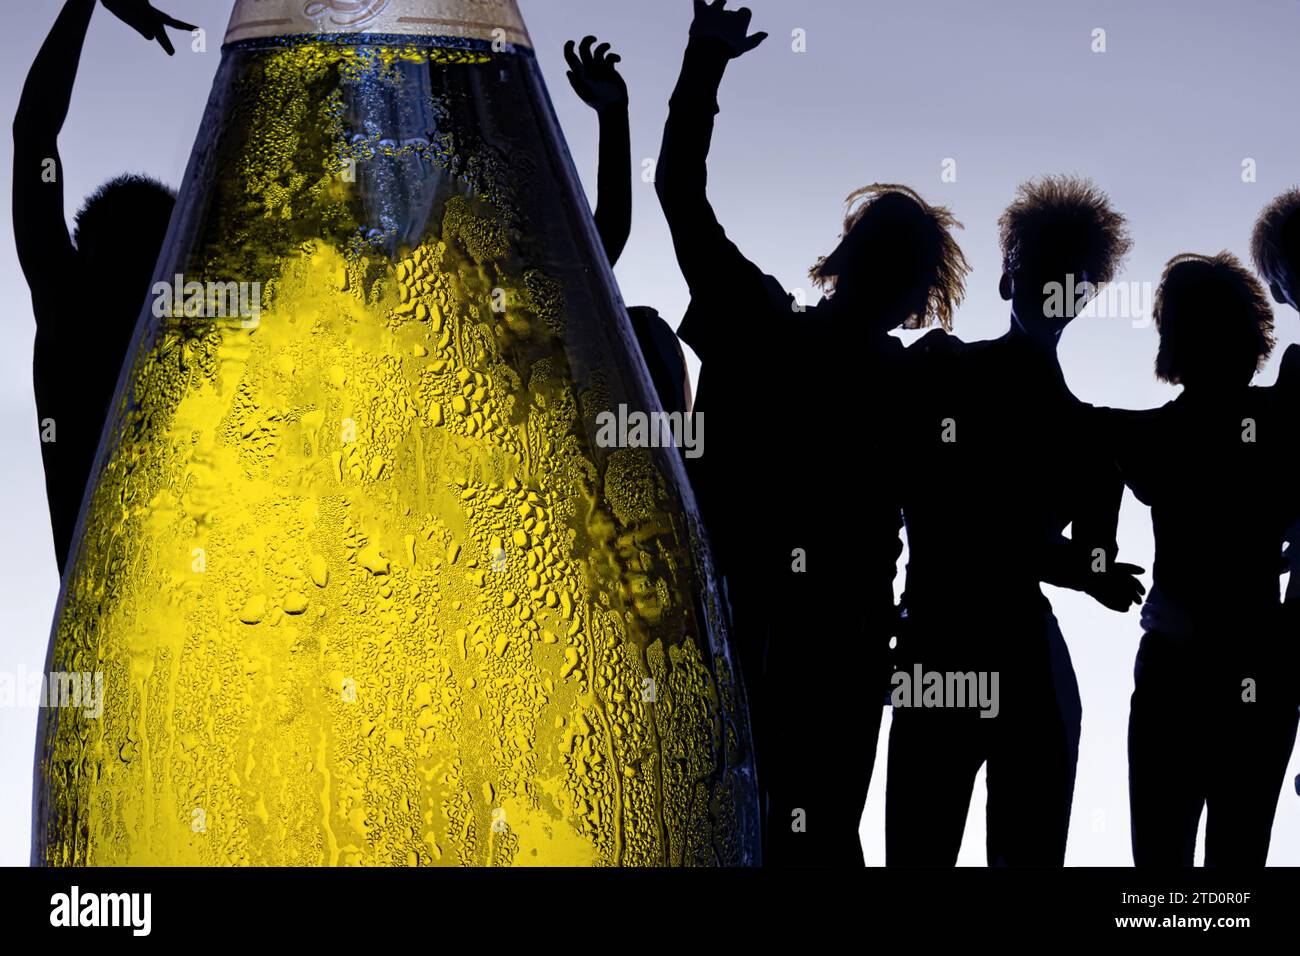 A dewy bottle of alcoholic drink with silhouettes of dancing people in the background Stock Photo